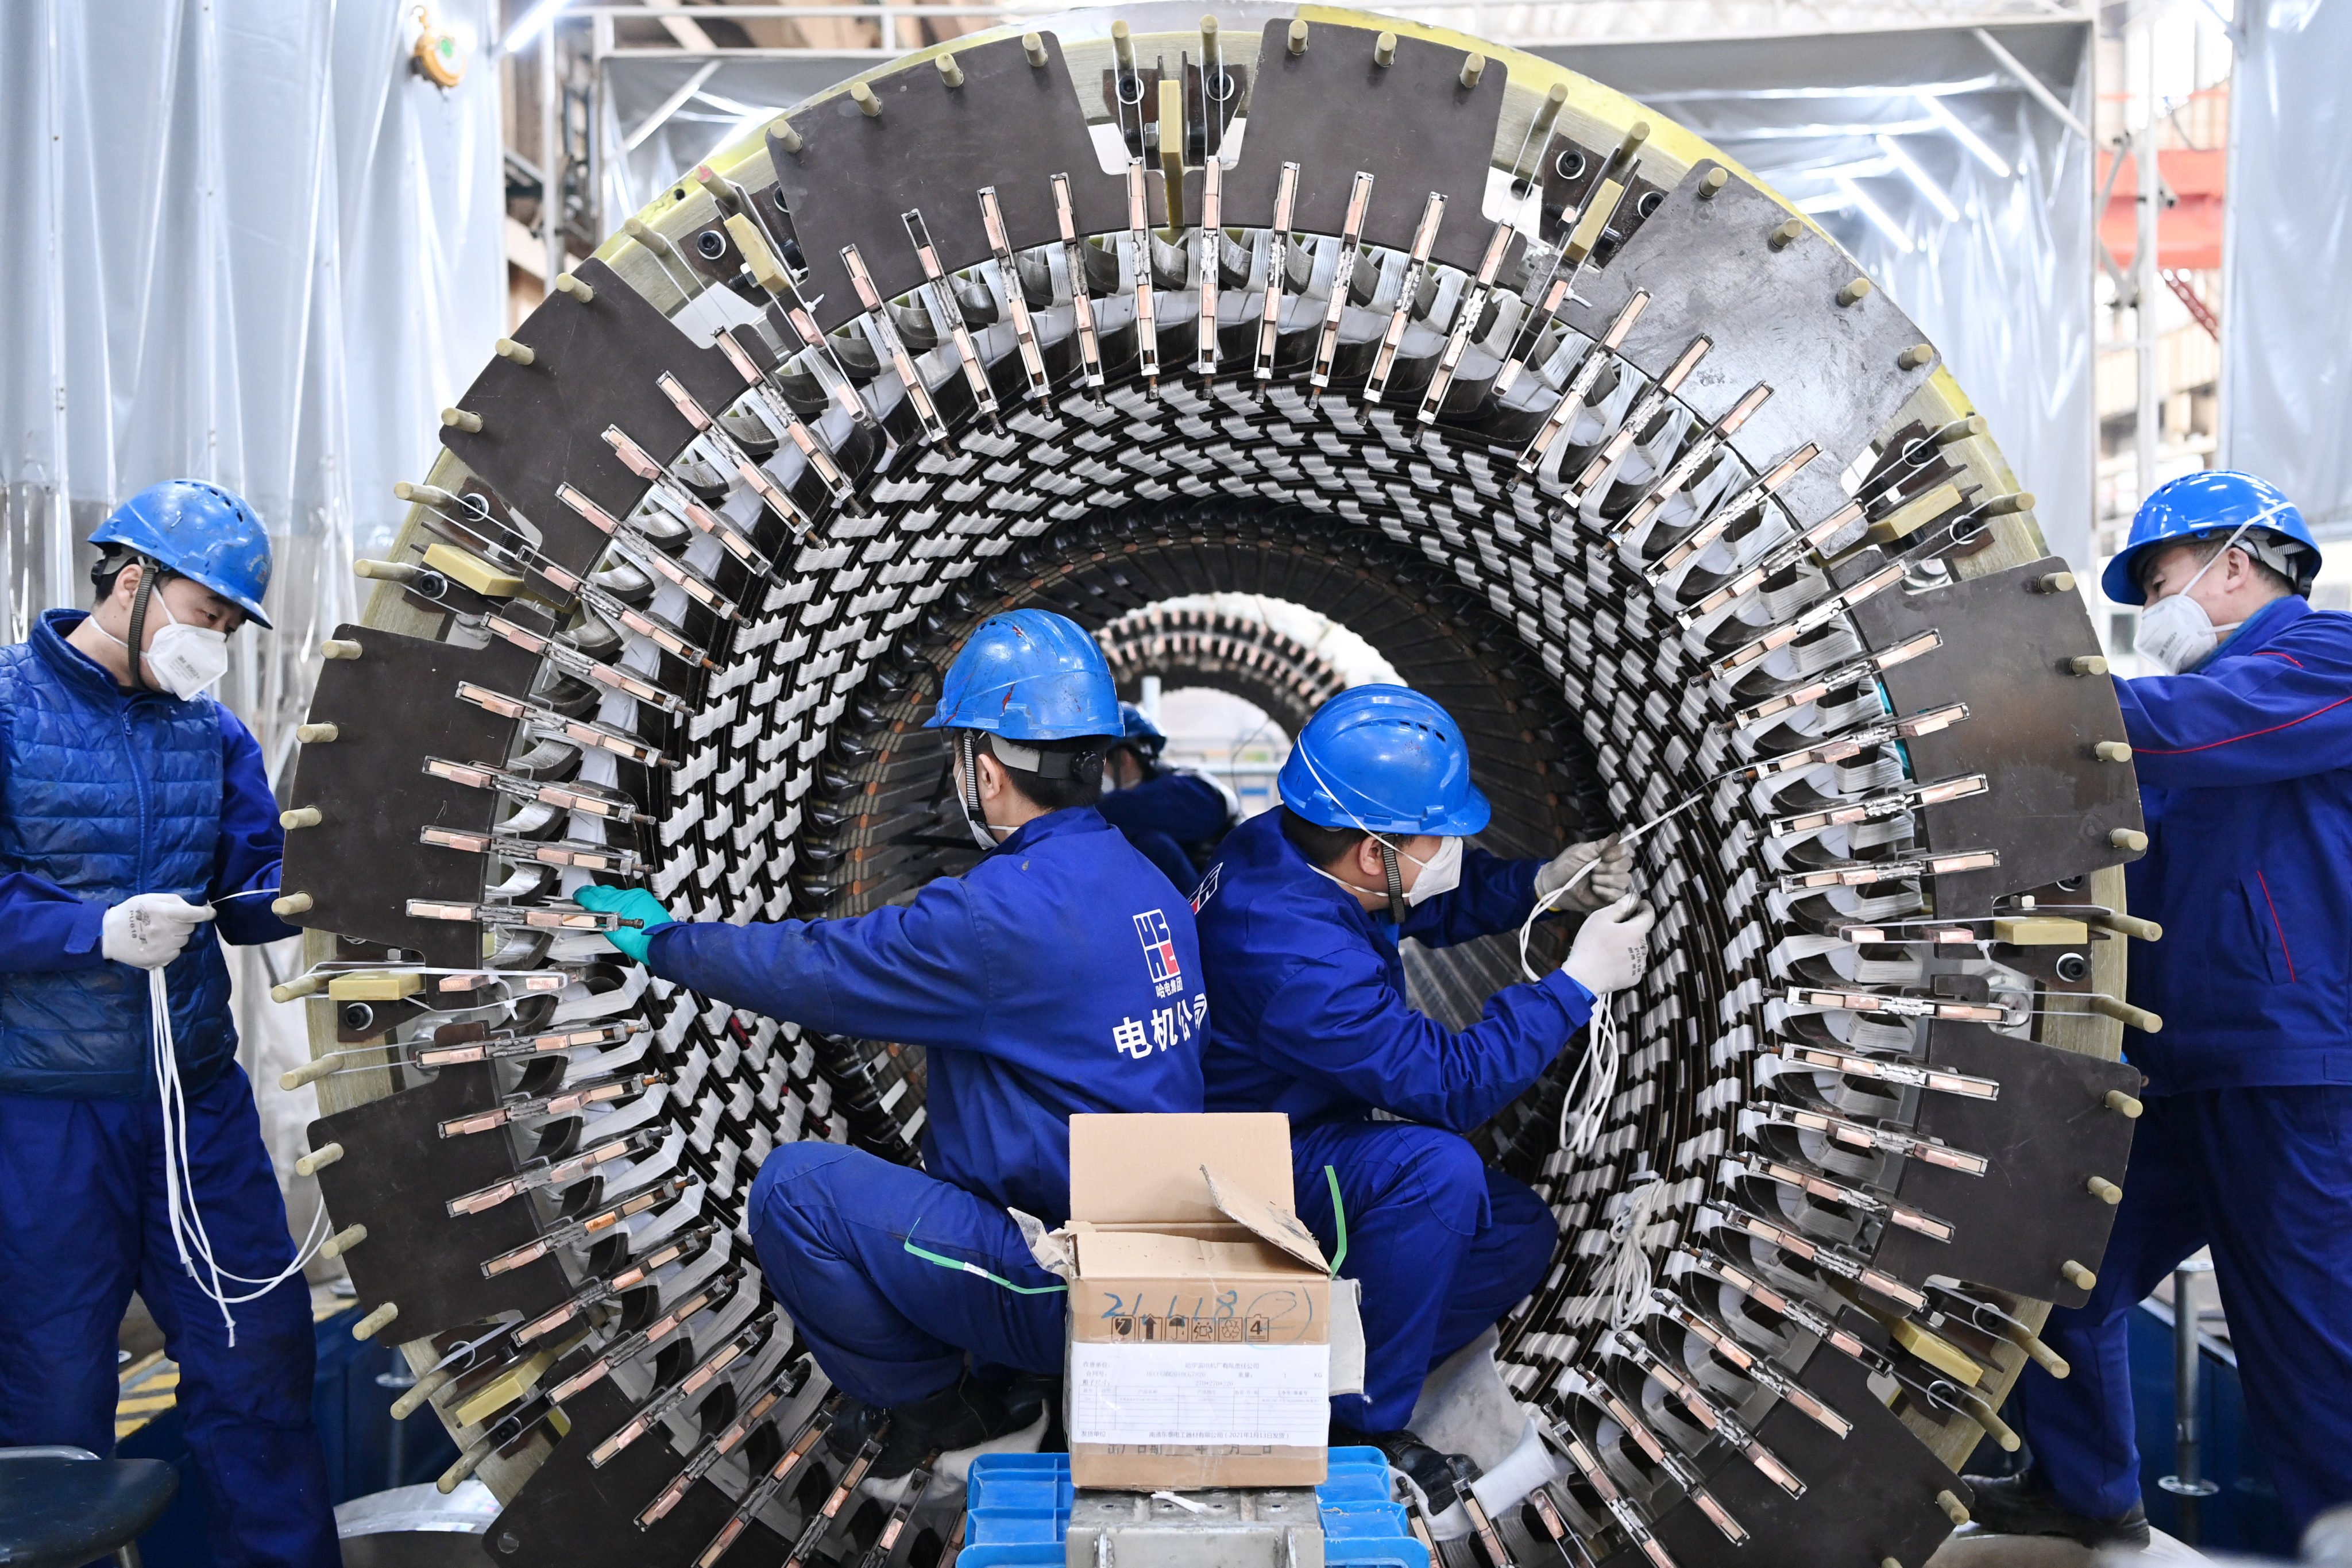 Workers are seen at the Harbin Electric Machinery Company in China’s Heilongjiang province, on February 22. Photo: Xinhua